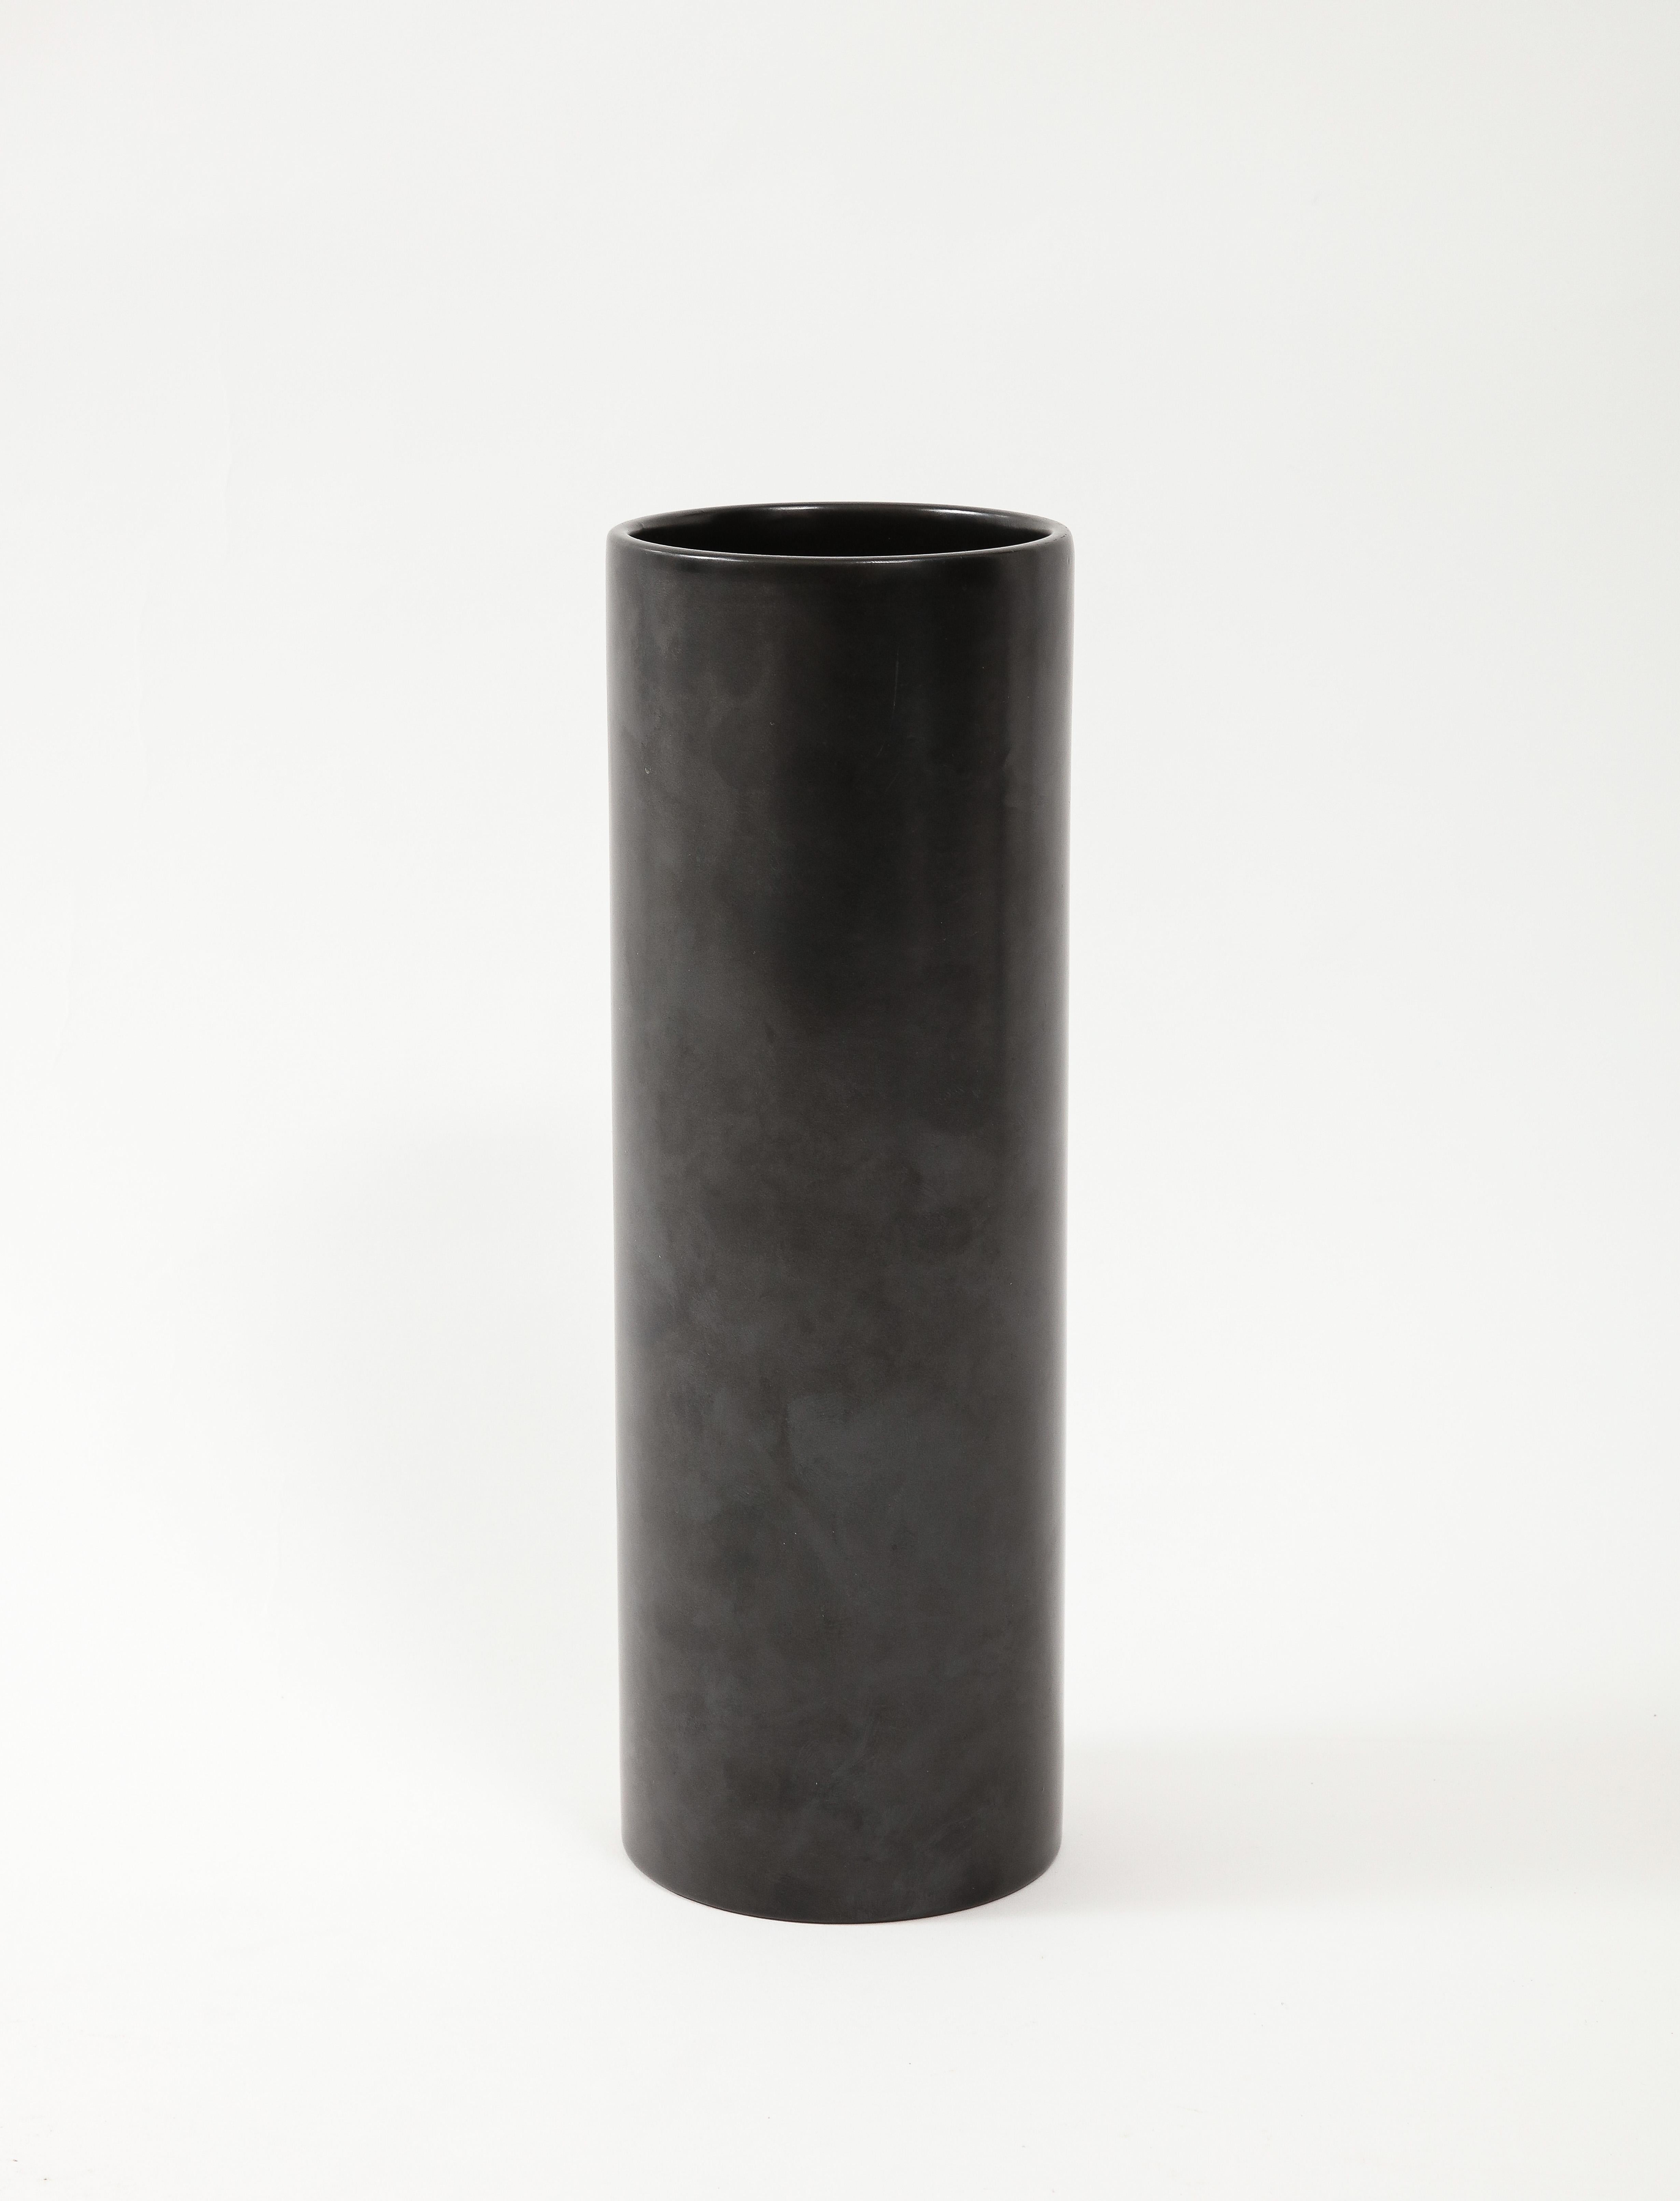 Large Georges Jouve Style Black Matte Cylinder Vase, France, c. 1950's In Good Condition For Sale In Brooklyn, NY